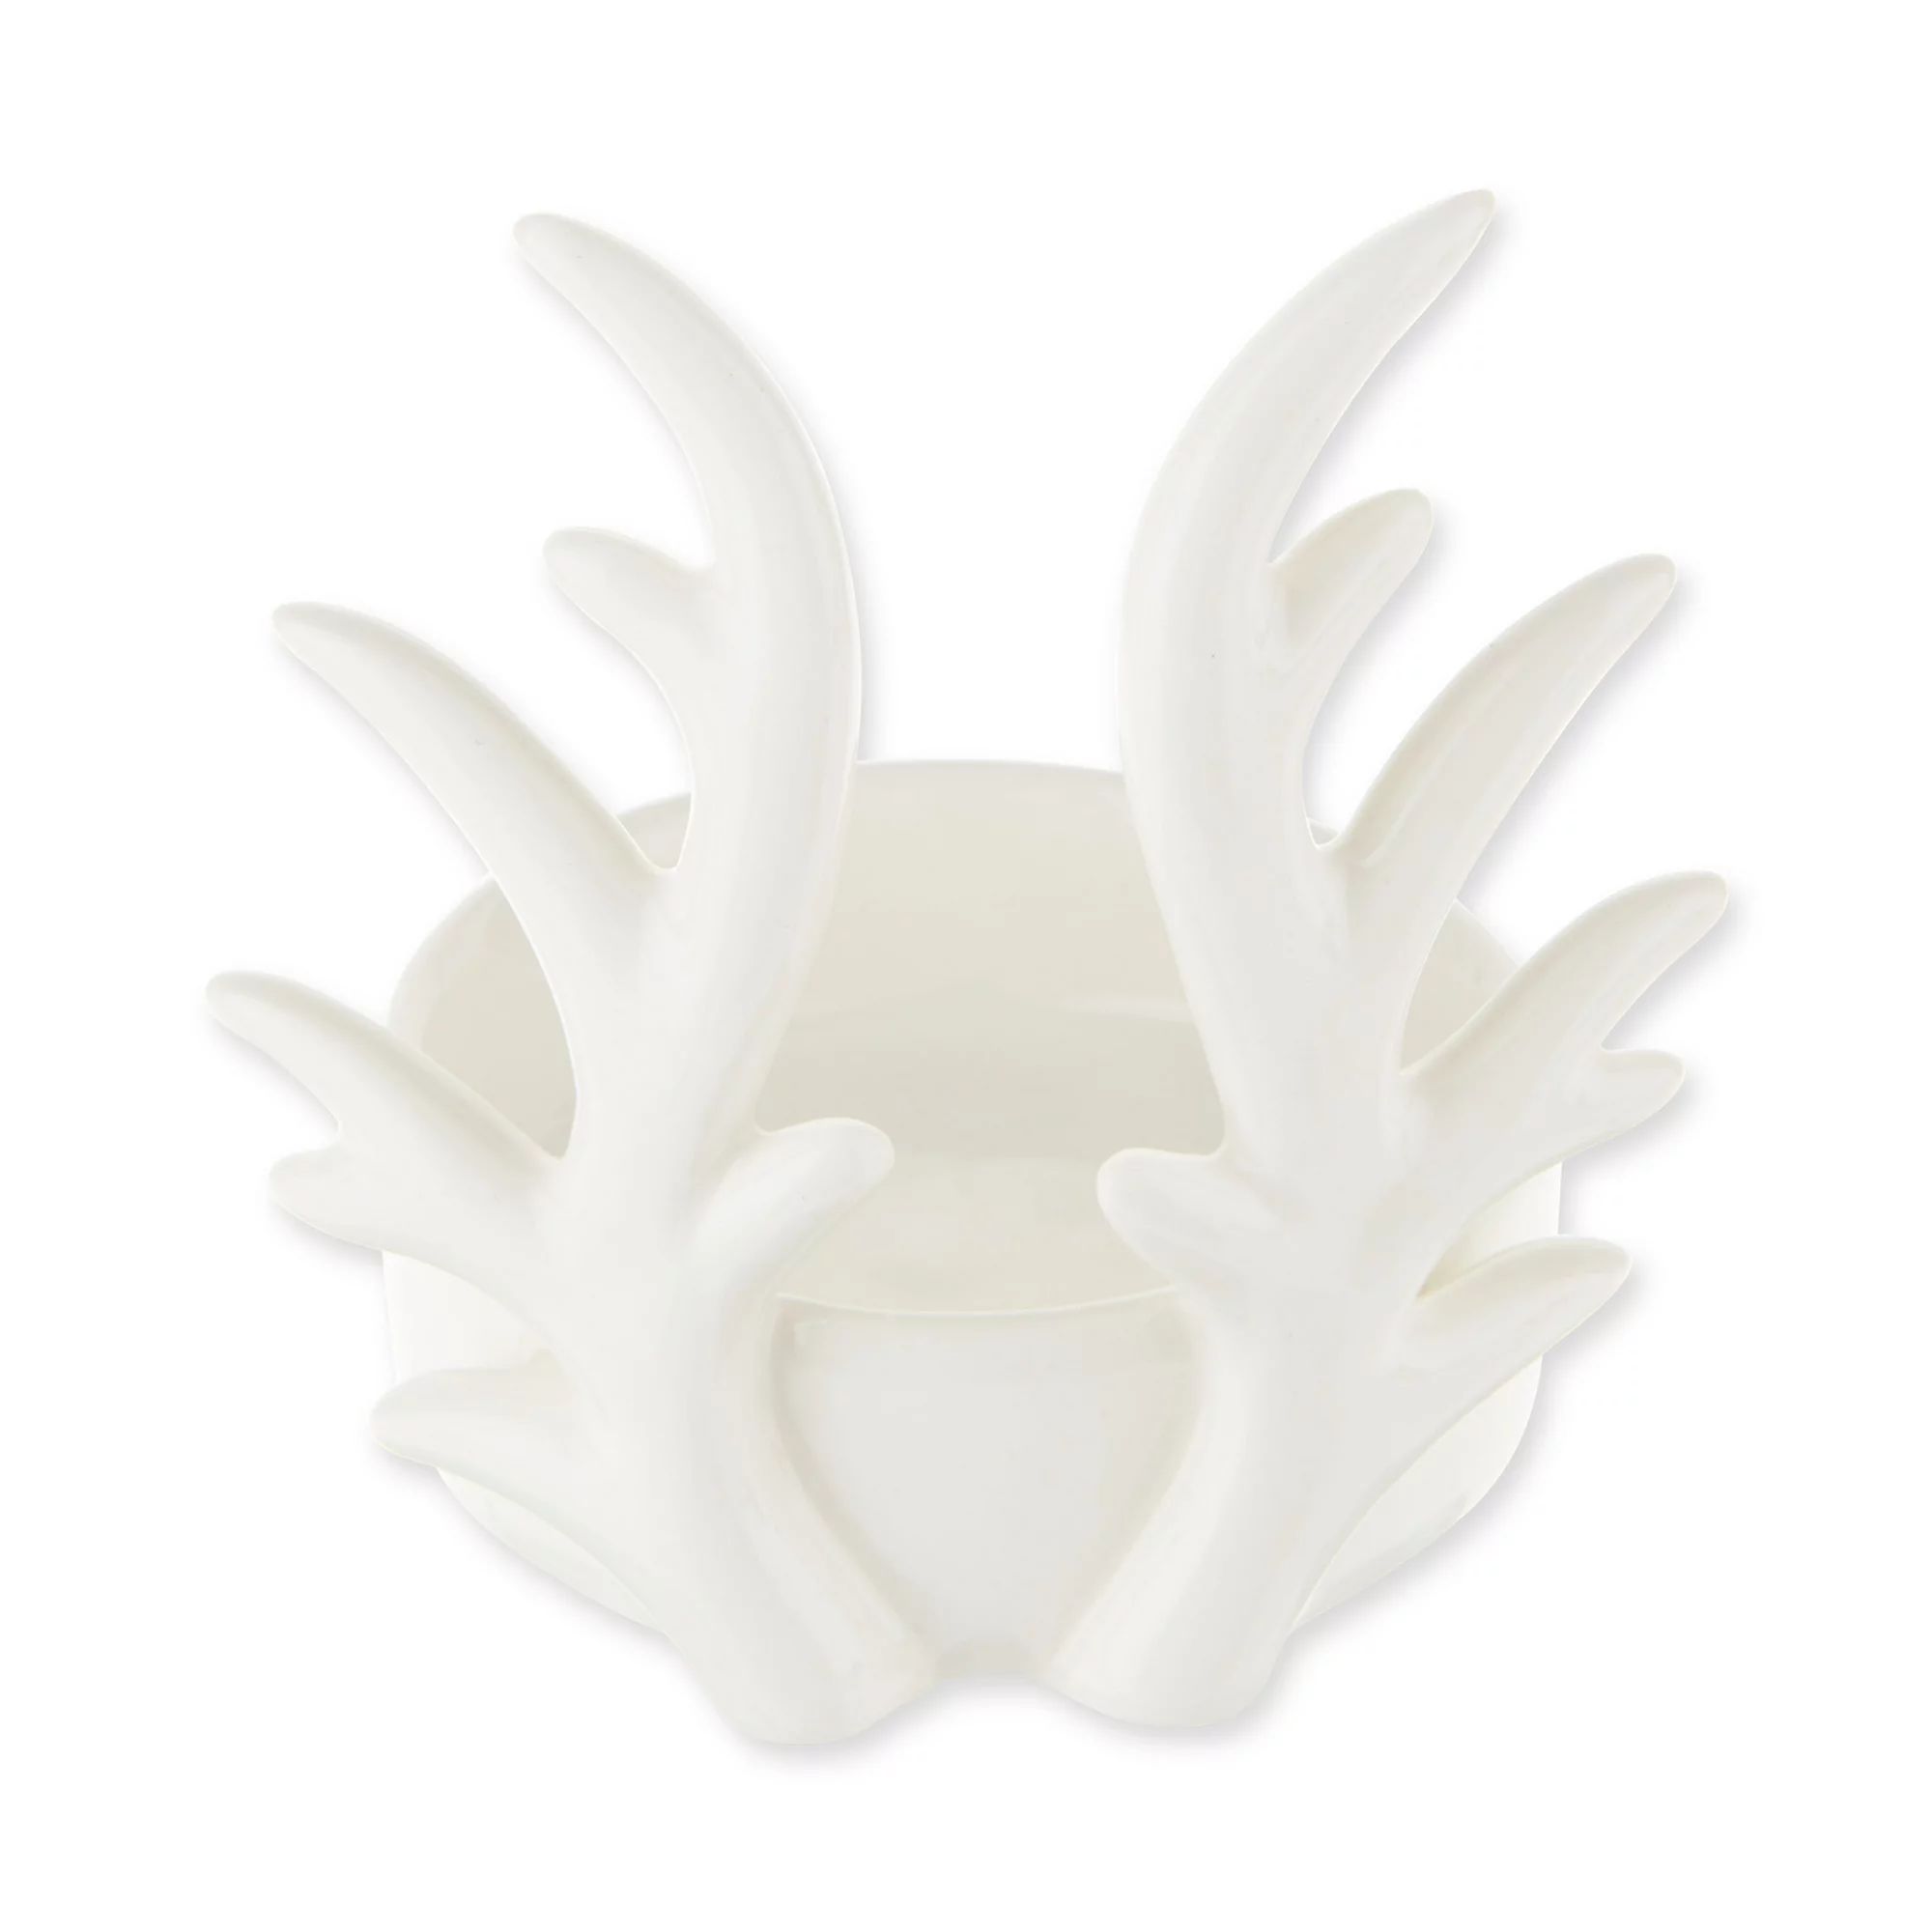 Small  White Ceramic Antler Candle Holder, 2.75", by Holiday Time | Walmart (US)